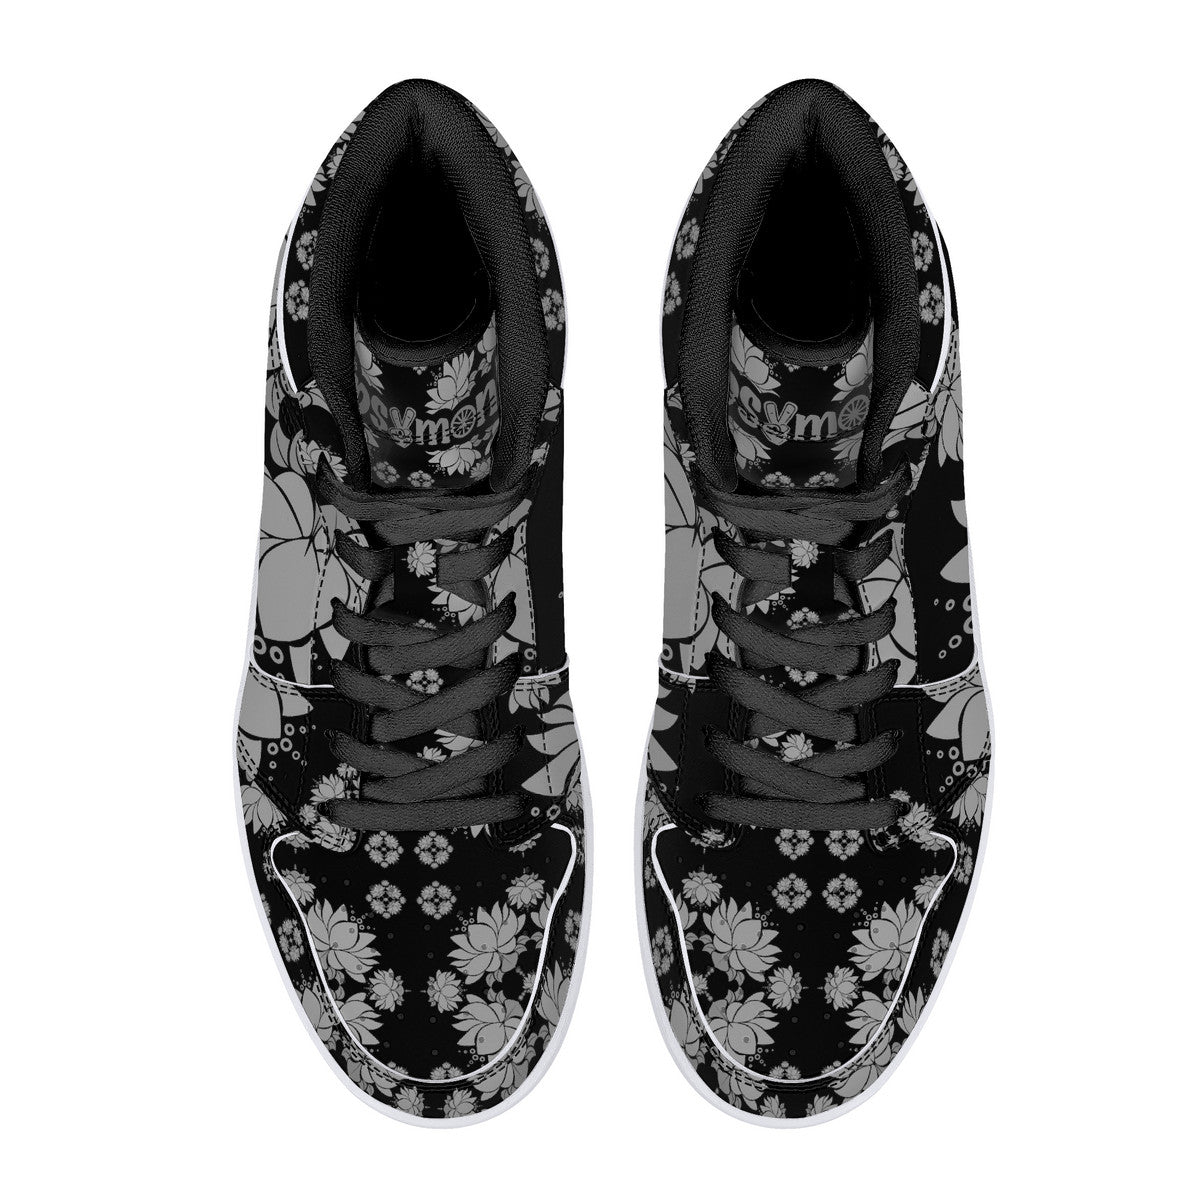 "Mono Lotus" High-Top Synthetic Leather Sneakers